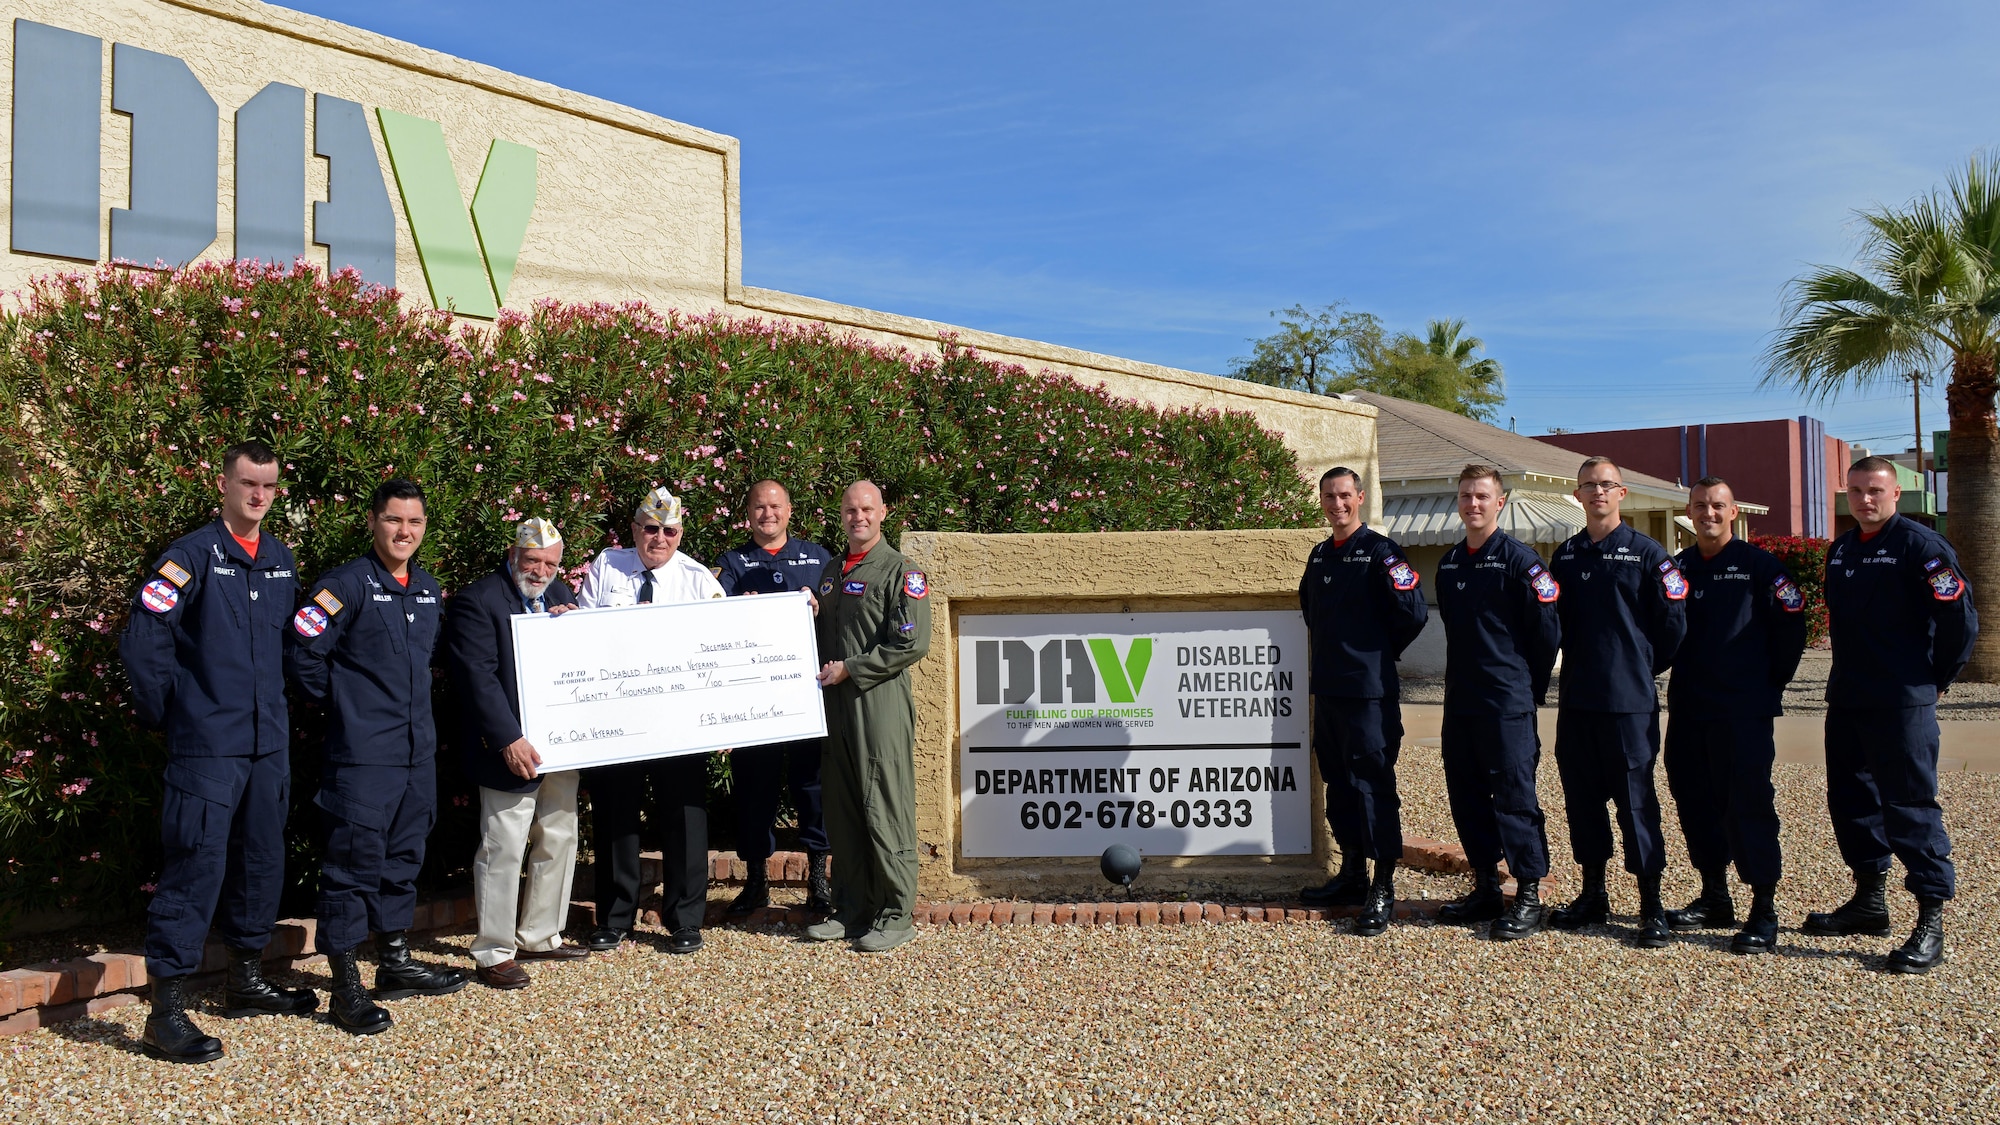 The F-35 Heritage Flight Team donates a 20 thousand dollar charity check to the Disabled Veterans Office Dec. 14, 2016, Phoenix, Ariz. The donations given to the DAV will help the organization fund programs, like healthcare services, psychological counseling, physical rehabilitation, job training and residential relocation. (U.S. Air Force photo by Airman 1st Class Pedro Mota)